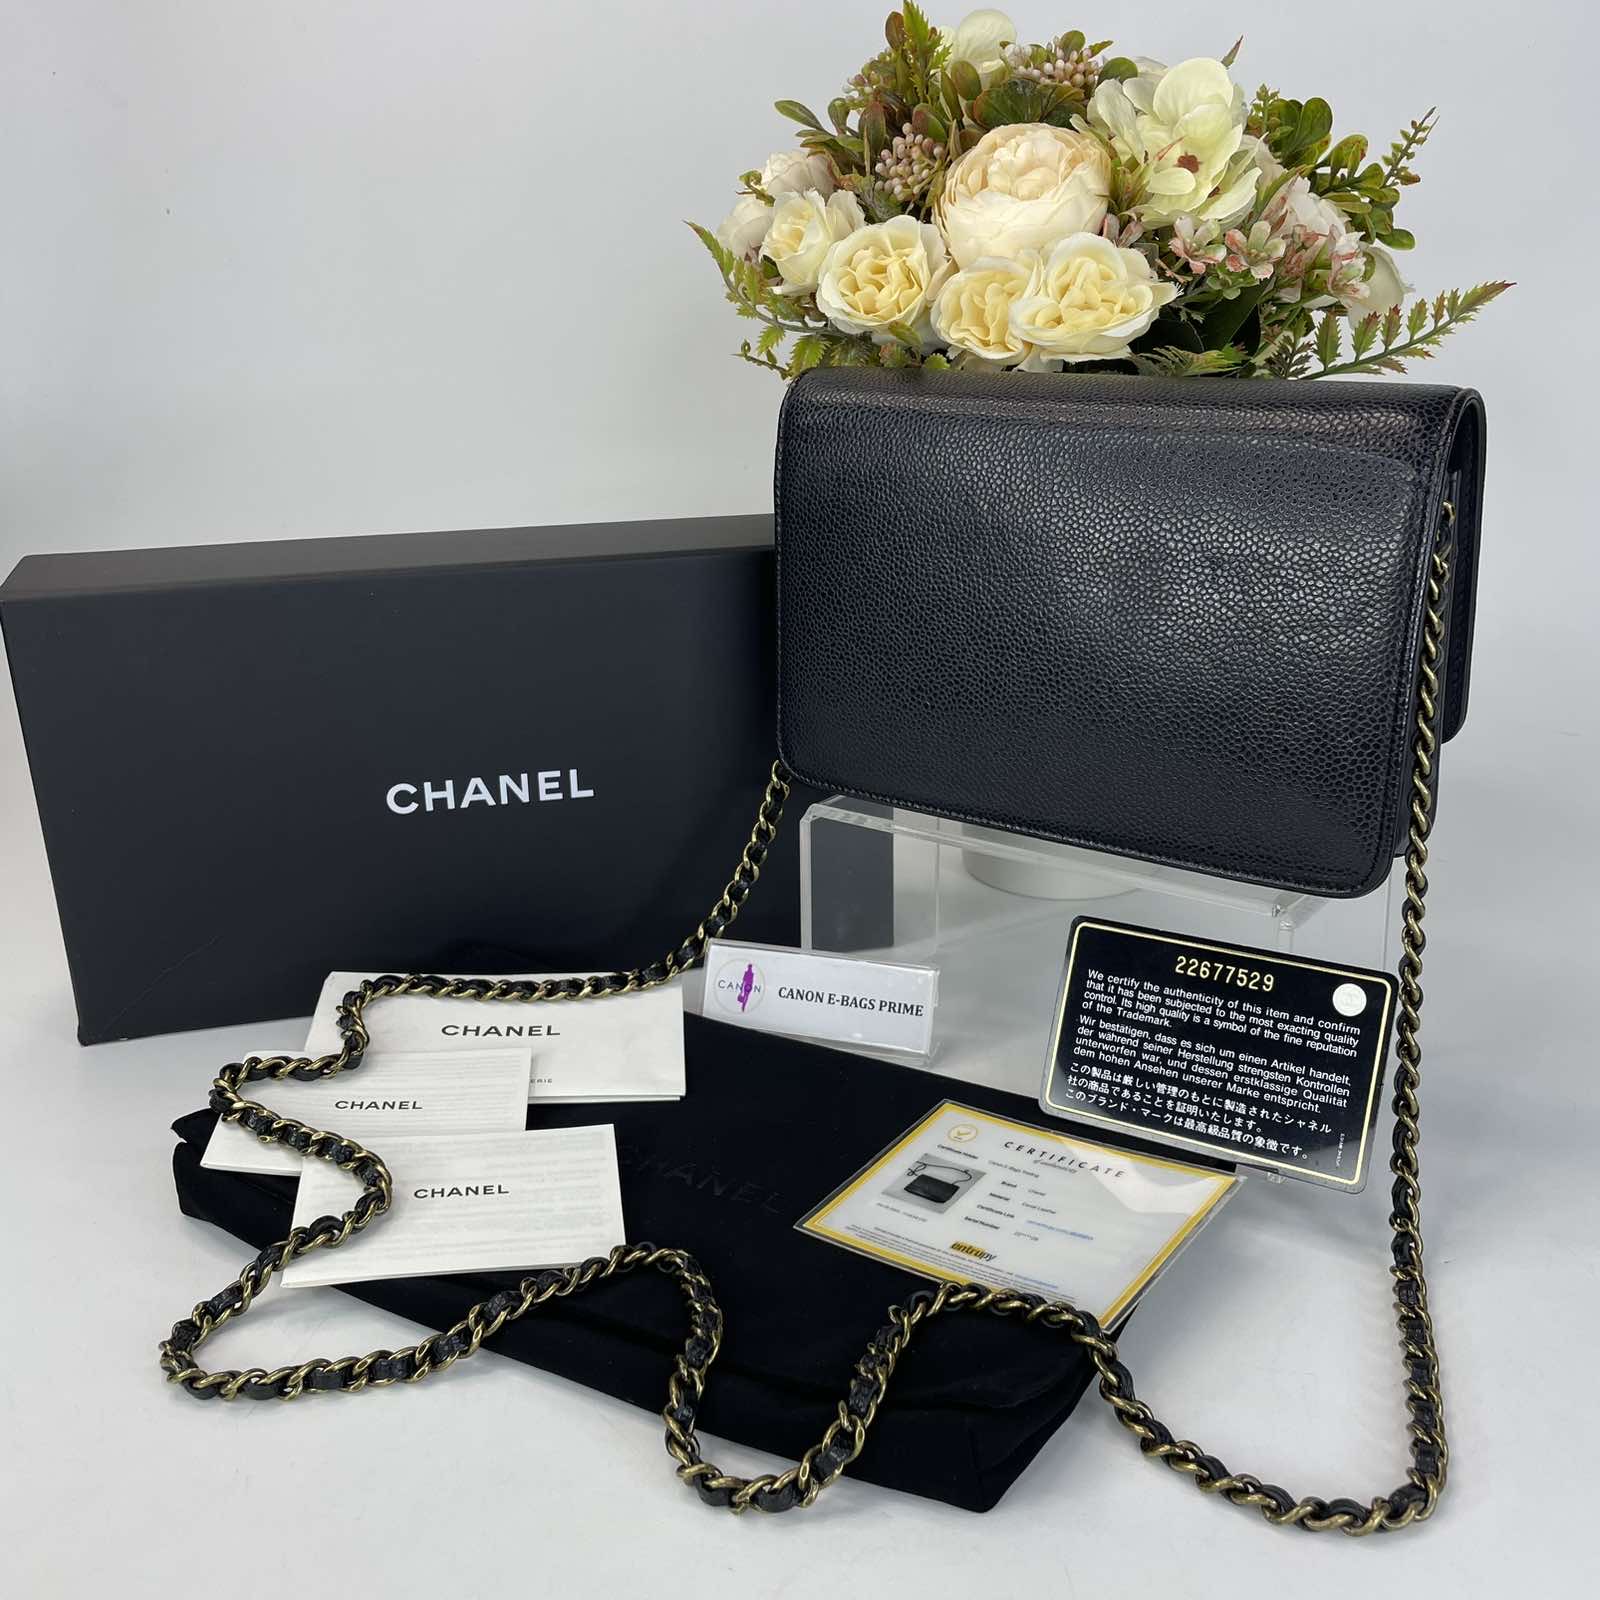 Chanel Black Caviar Timeless Wallet on Chain Gold Hardware Series 22xxxxxx.  Made in Italy. With care cards, dustbag, box, authenticity card &  certificate of authenticity from ENTRUPY ❤️ - Canon E-Bags Prime